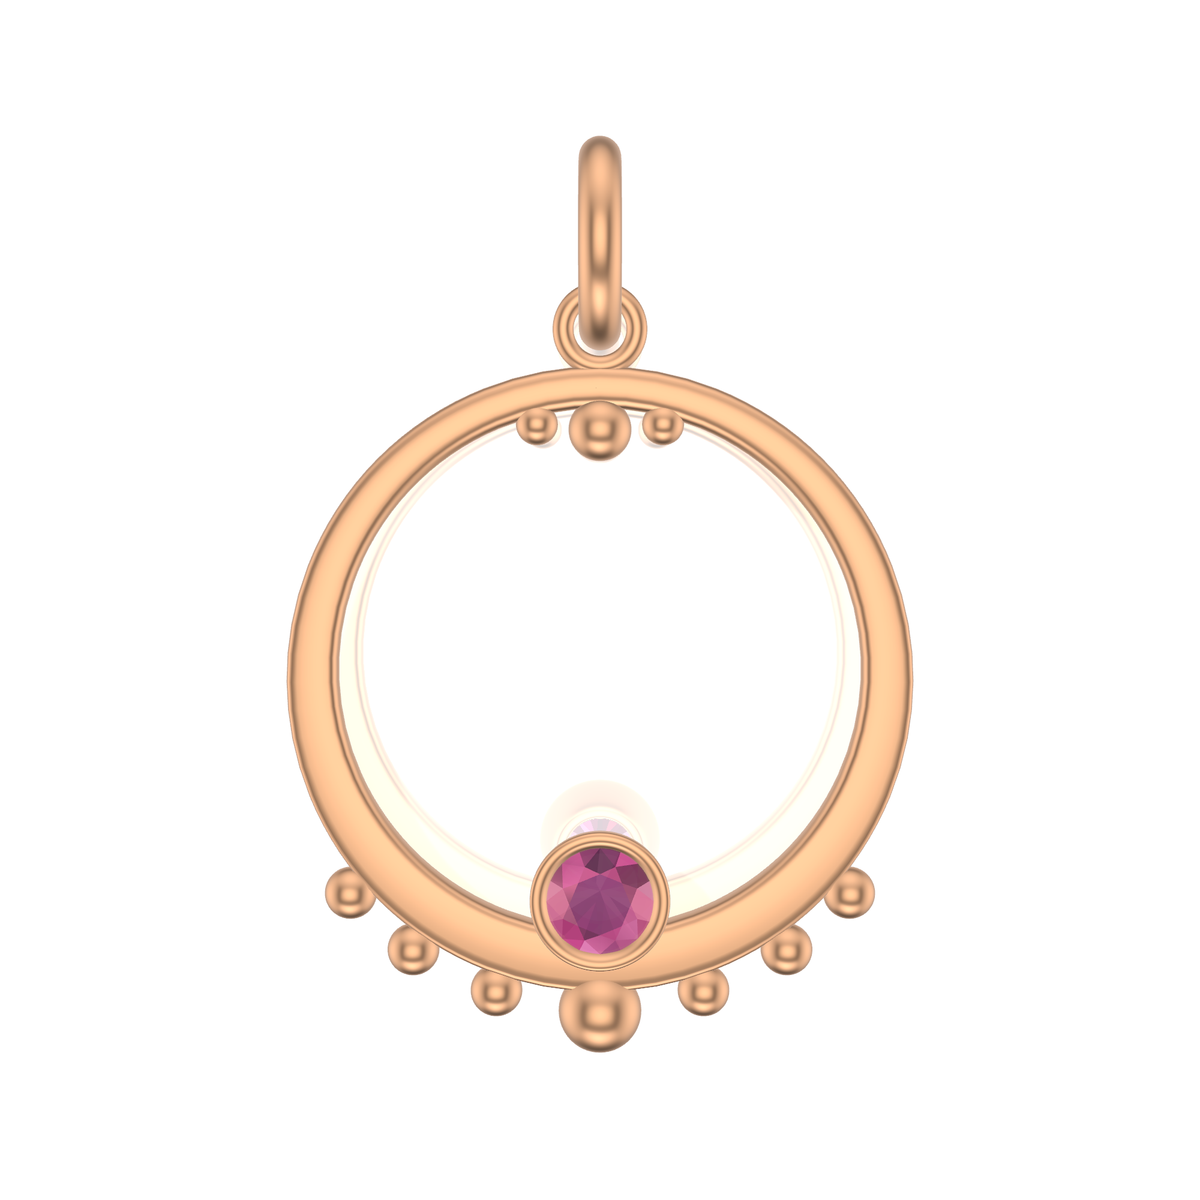 Mothers Circle Framed Charm | Gold Pendant With Granules, Large | Choose Your Metal And Gemstones